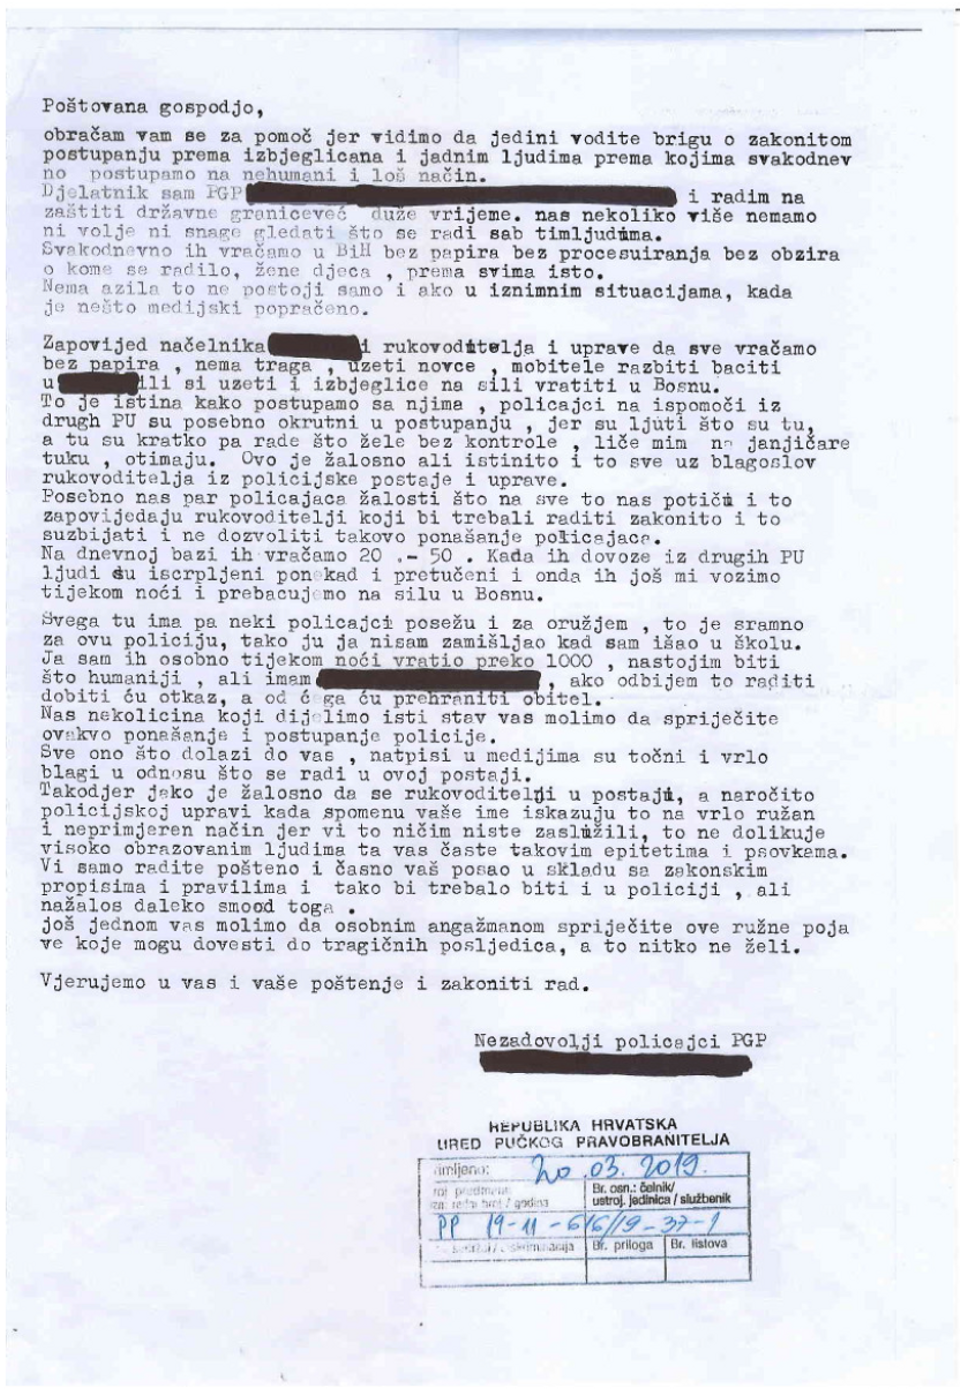 Copy of an anonymous complaint sent to Croatian Ombudswoman by Croatian police officers denouncing the violence against migrants and asylum seekers committed by their colleagues. A translation in English is available at: https://www.borderviolence.eu/complaint-by-croatian-police-officers-who-are-being-urged-to-act-unlawfully/